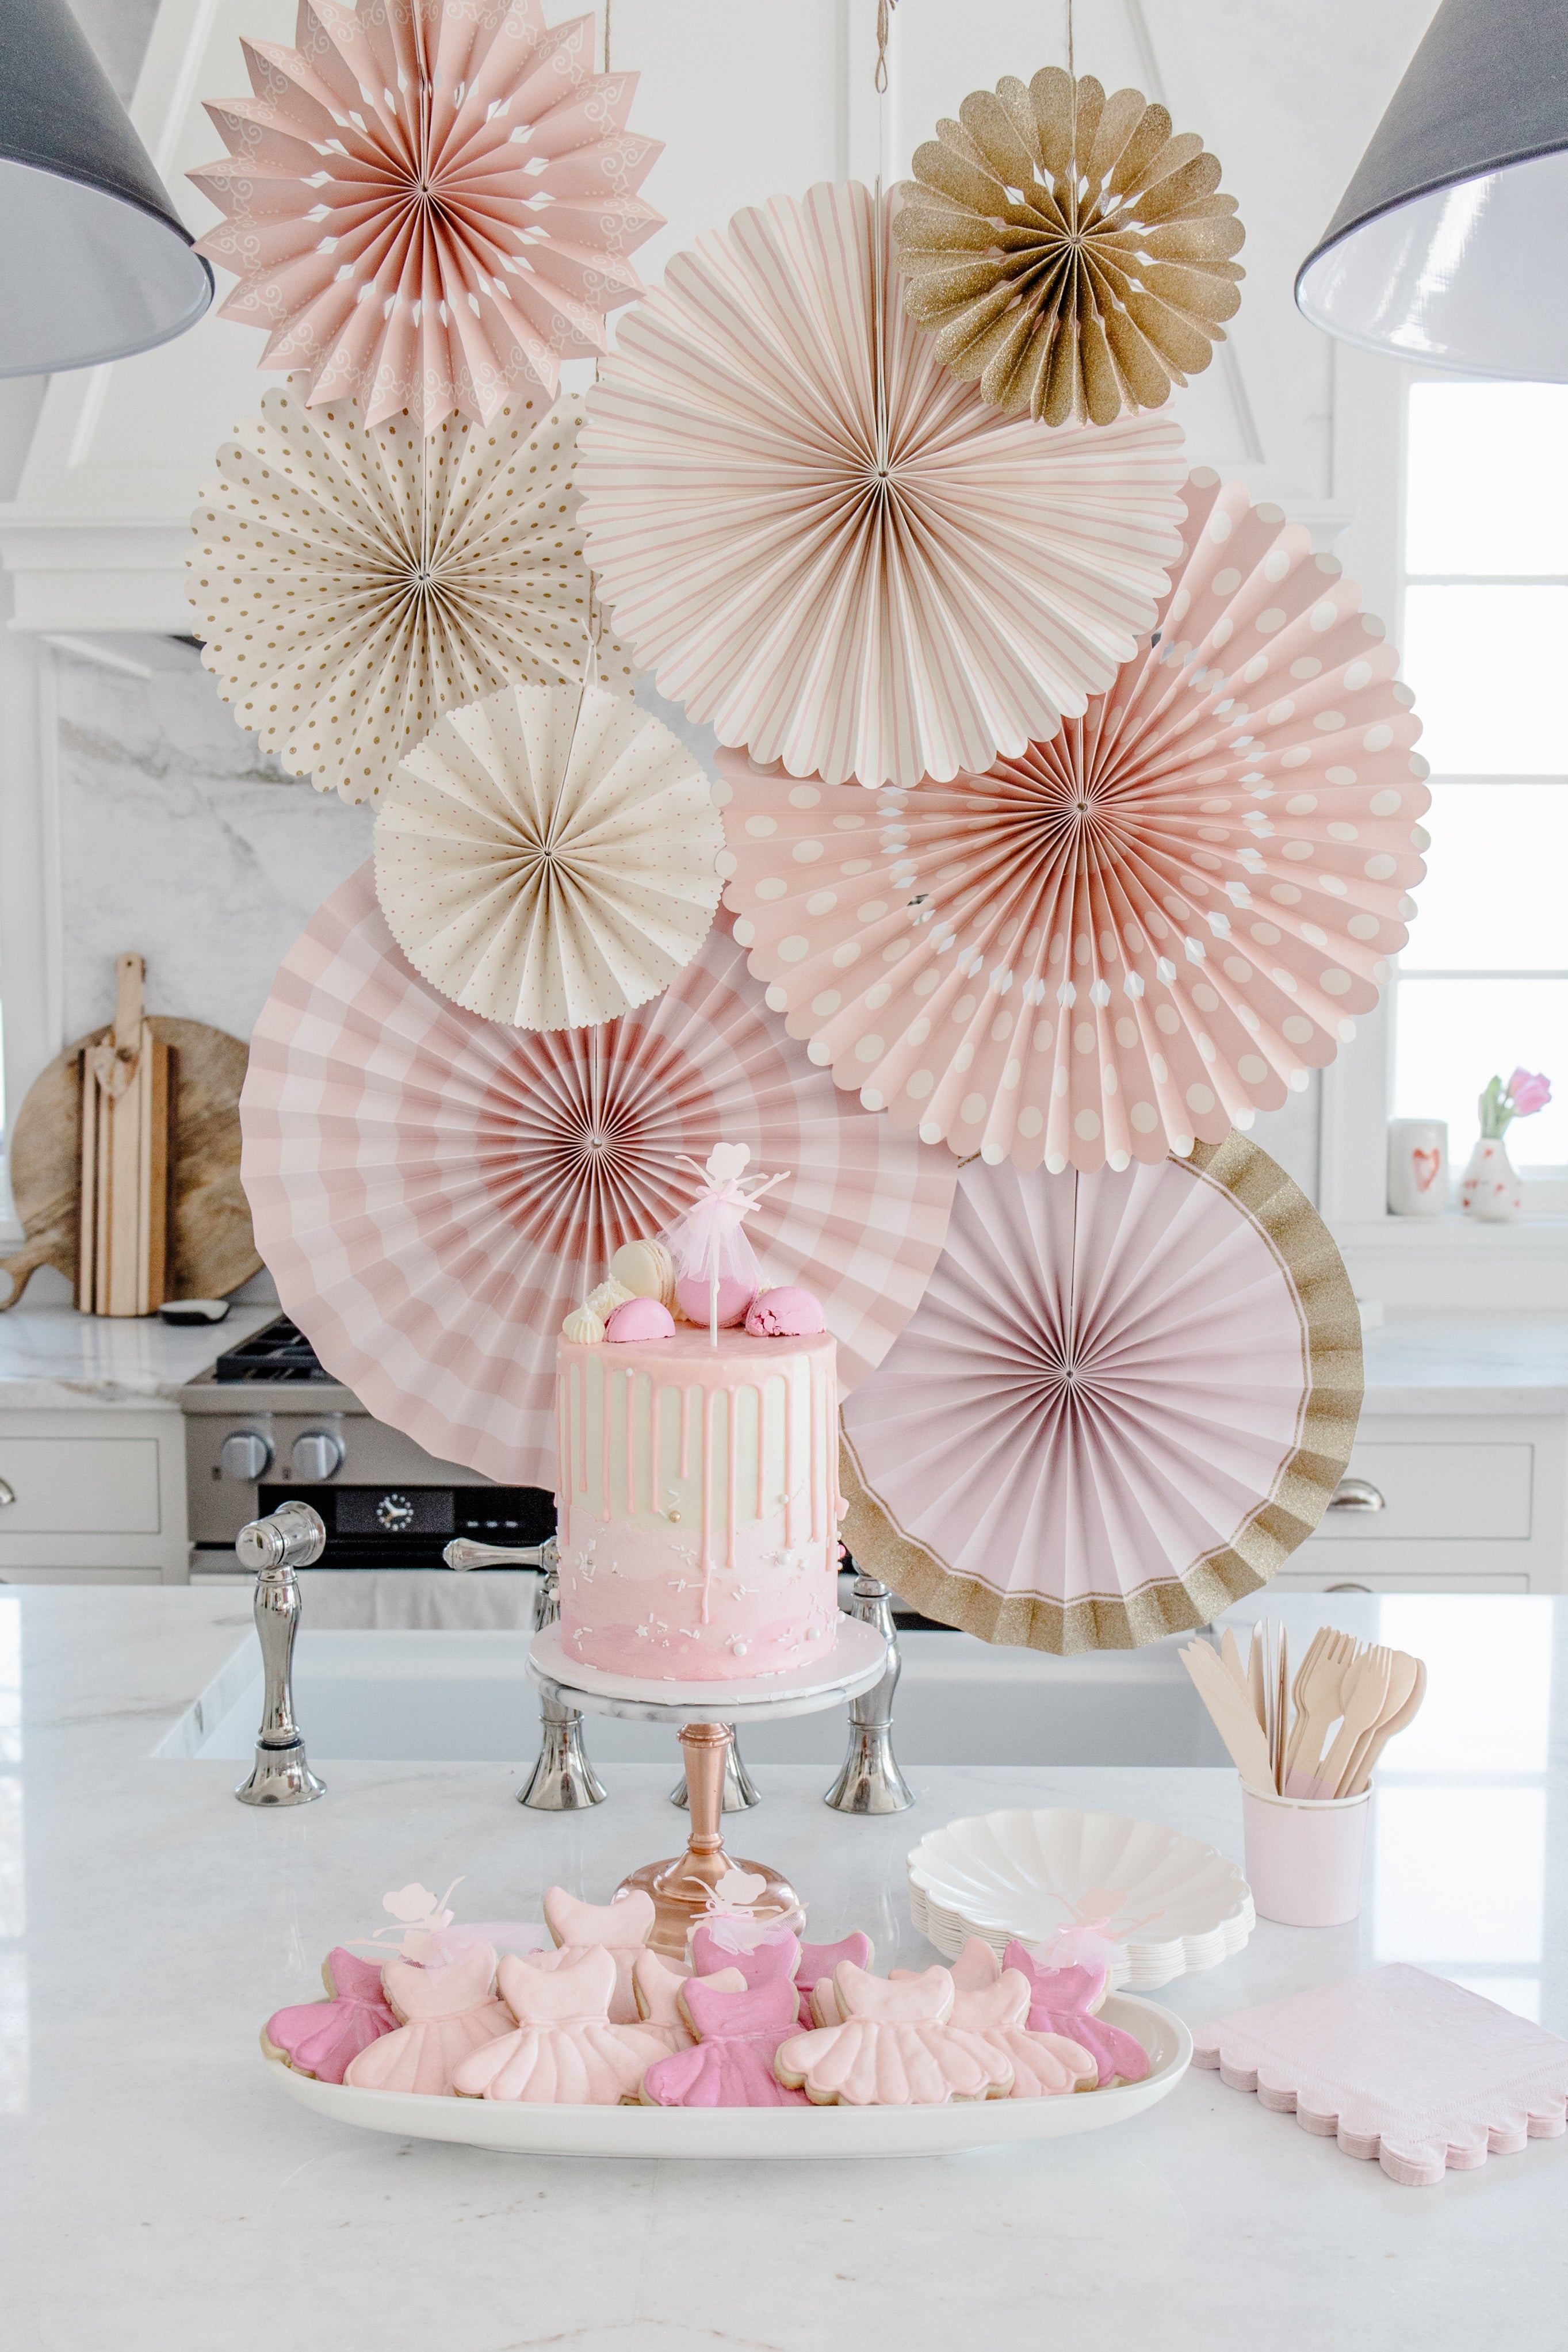 Ballerina themed sweet table with cake and cookies